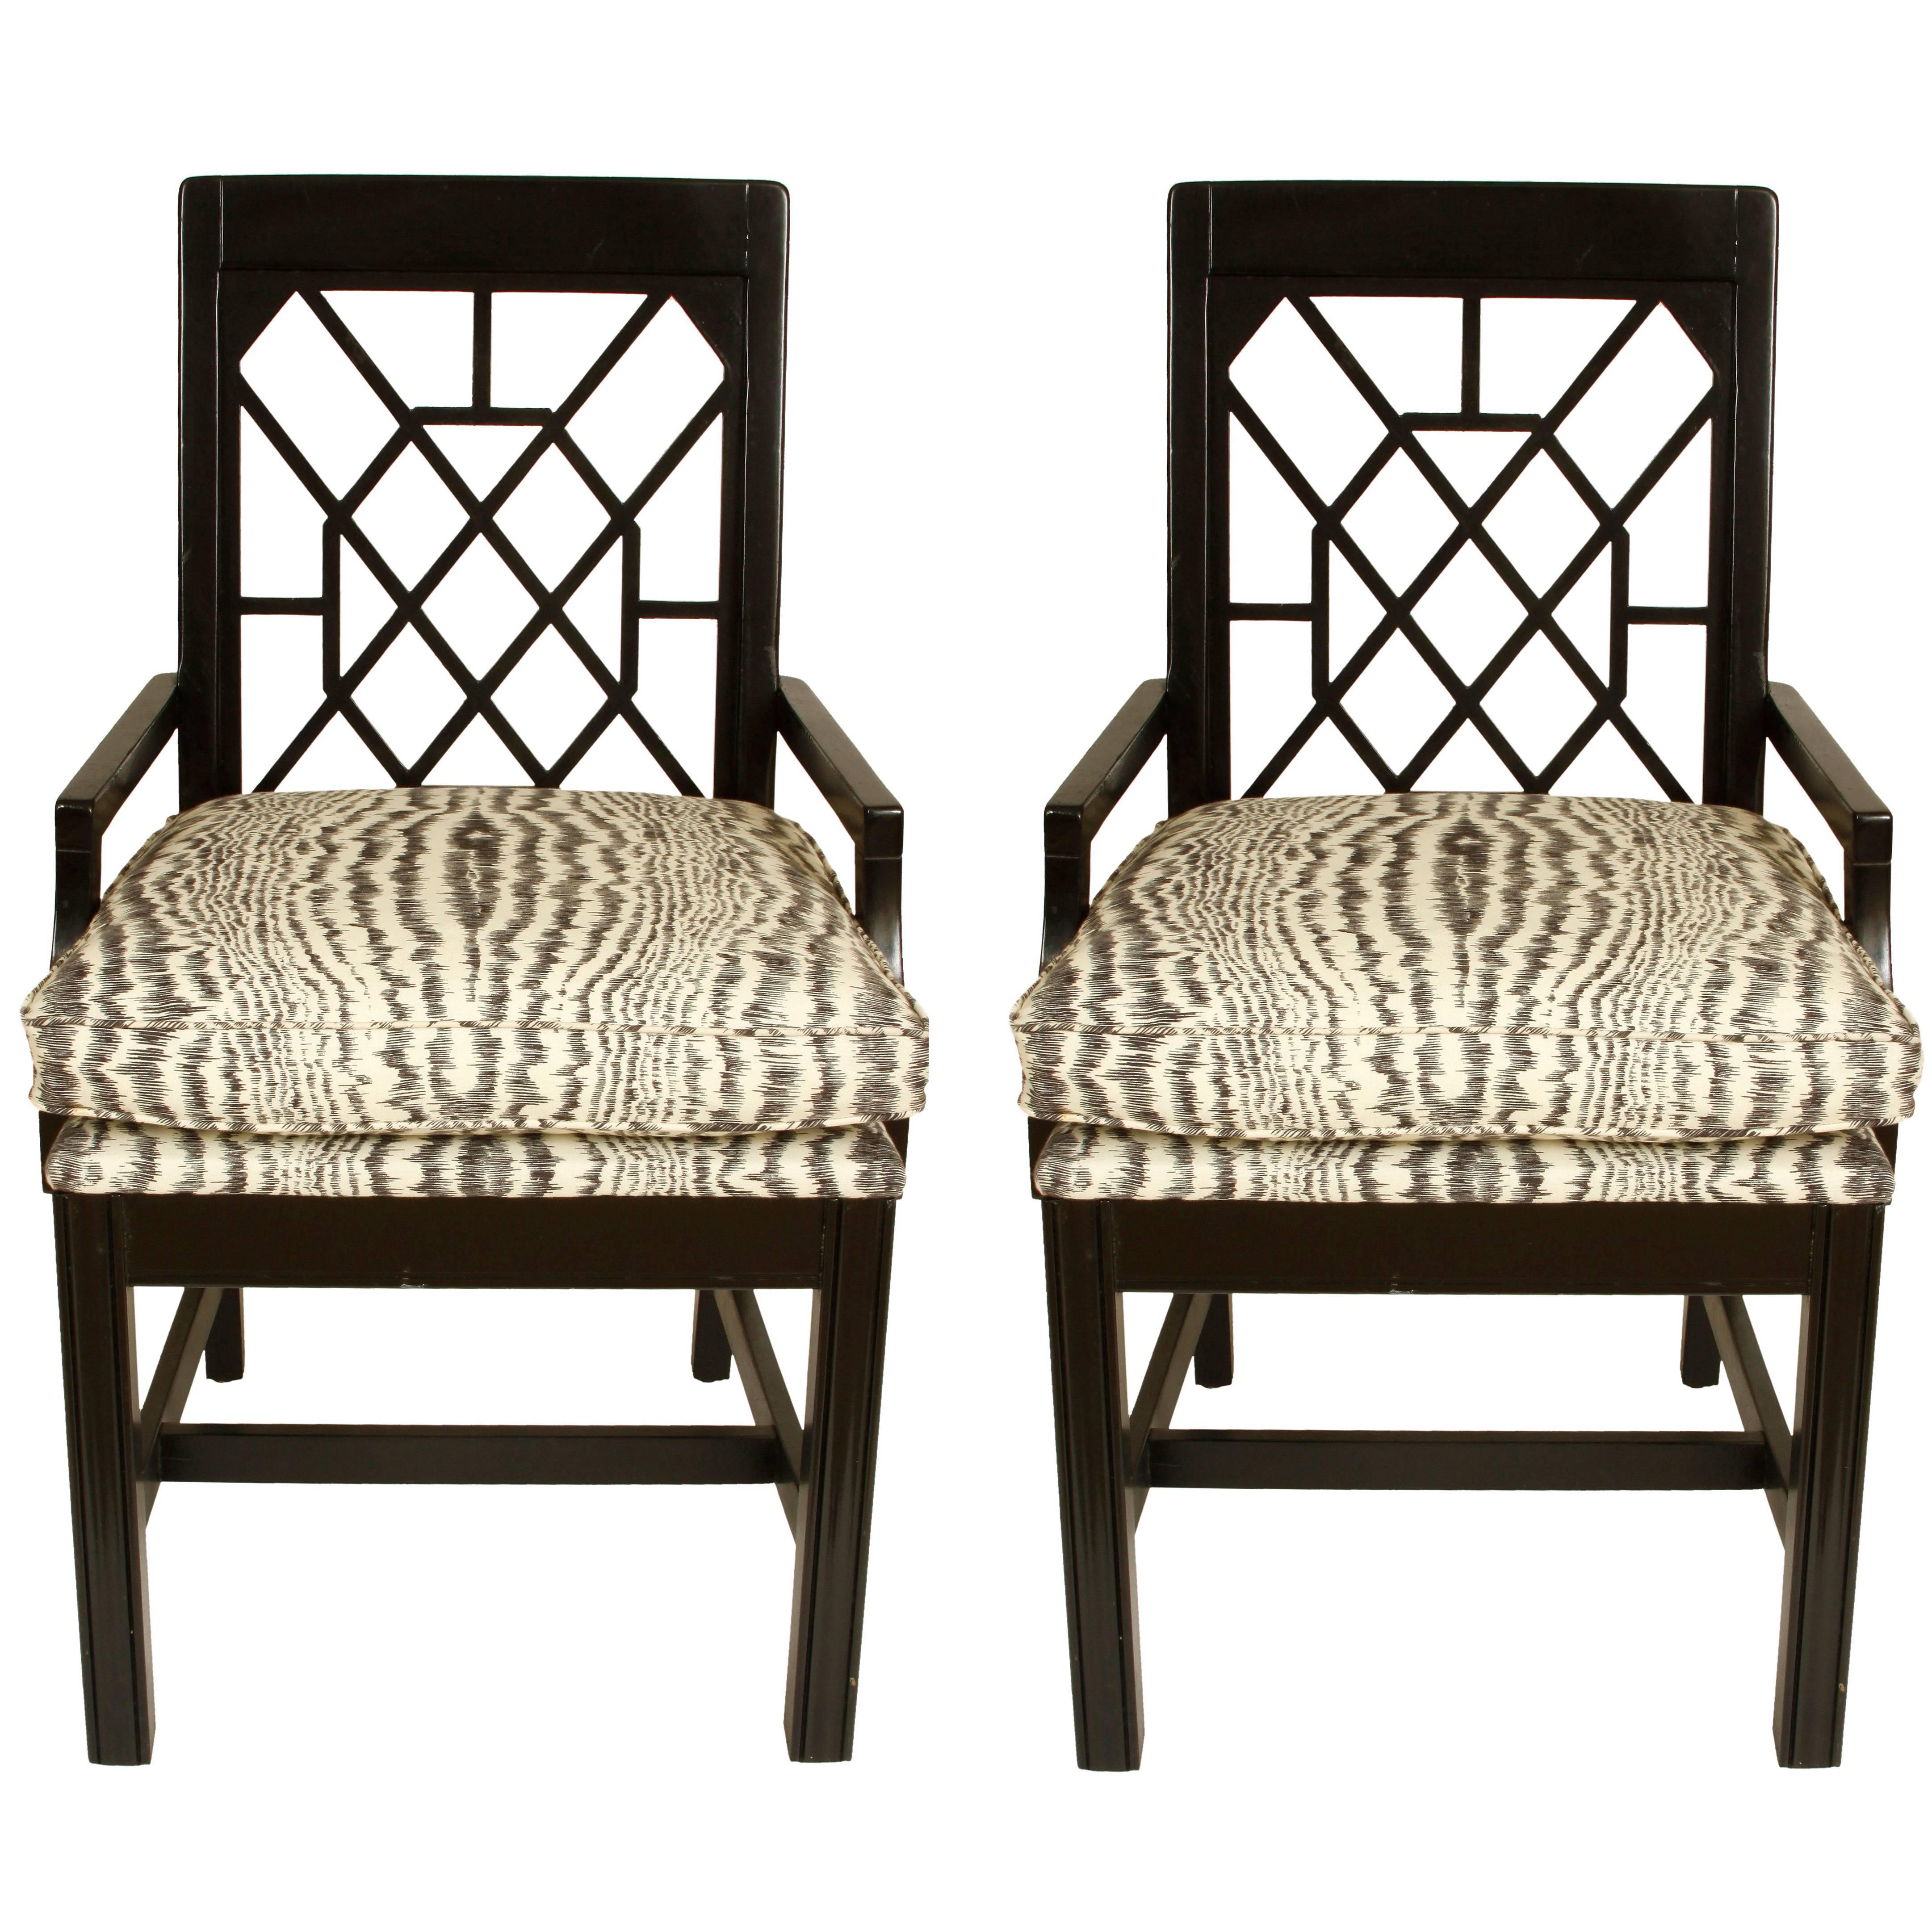 Pair of Black Painted Fretwork Chairs